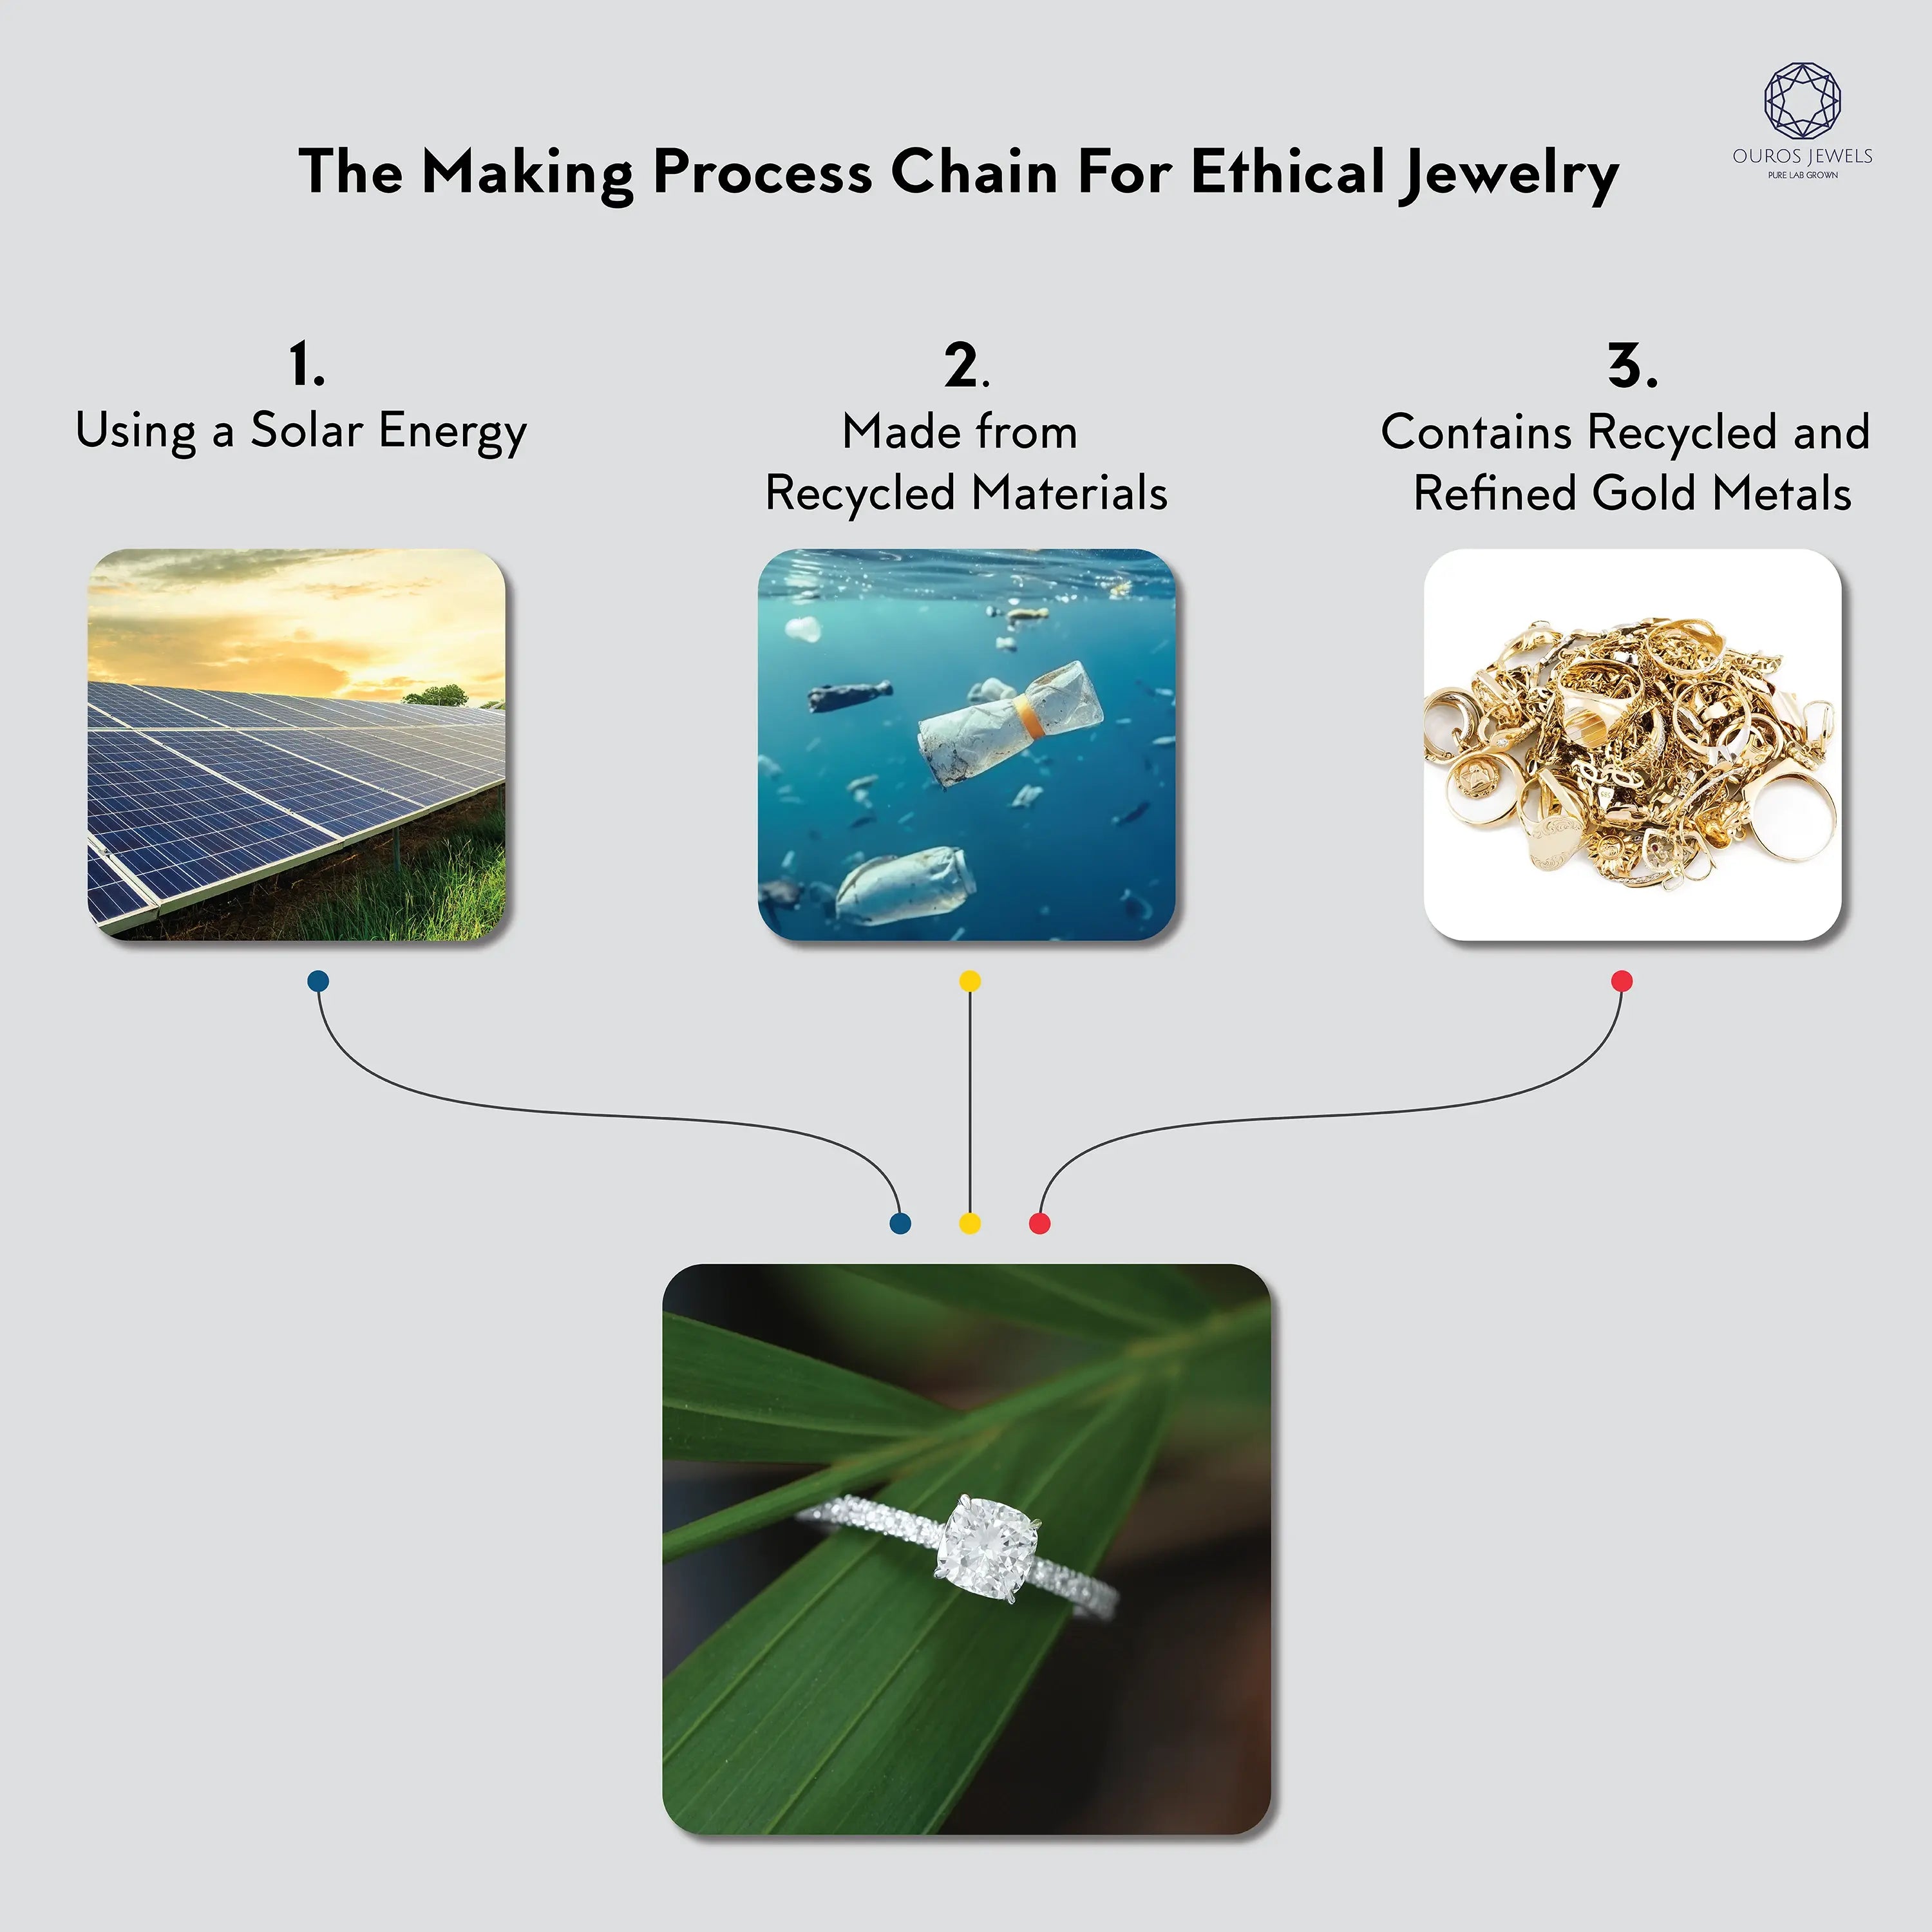 Ethical jewelry making chain and materials that has been used